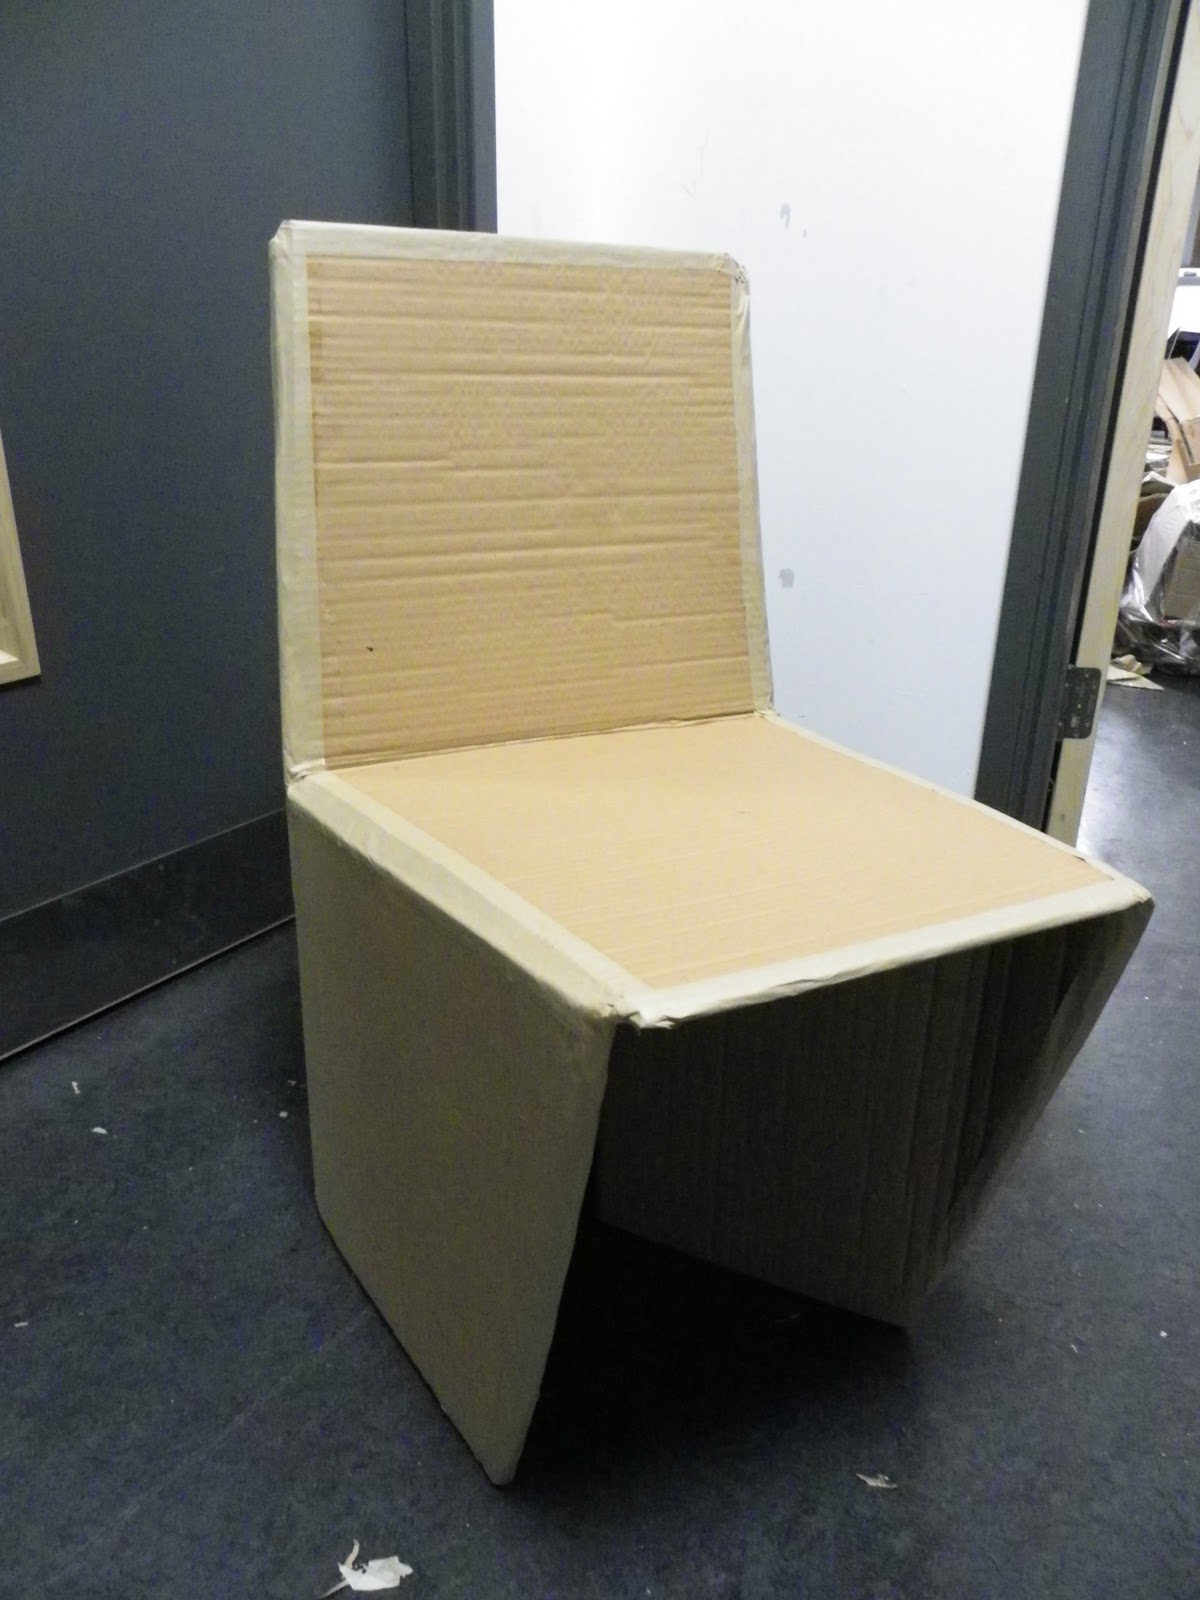 What Is This Cardboard Chair